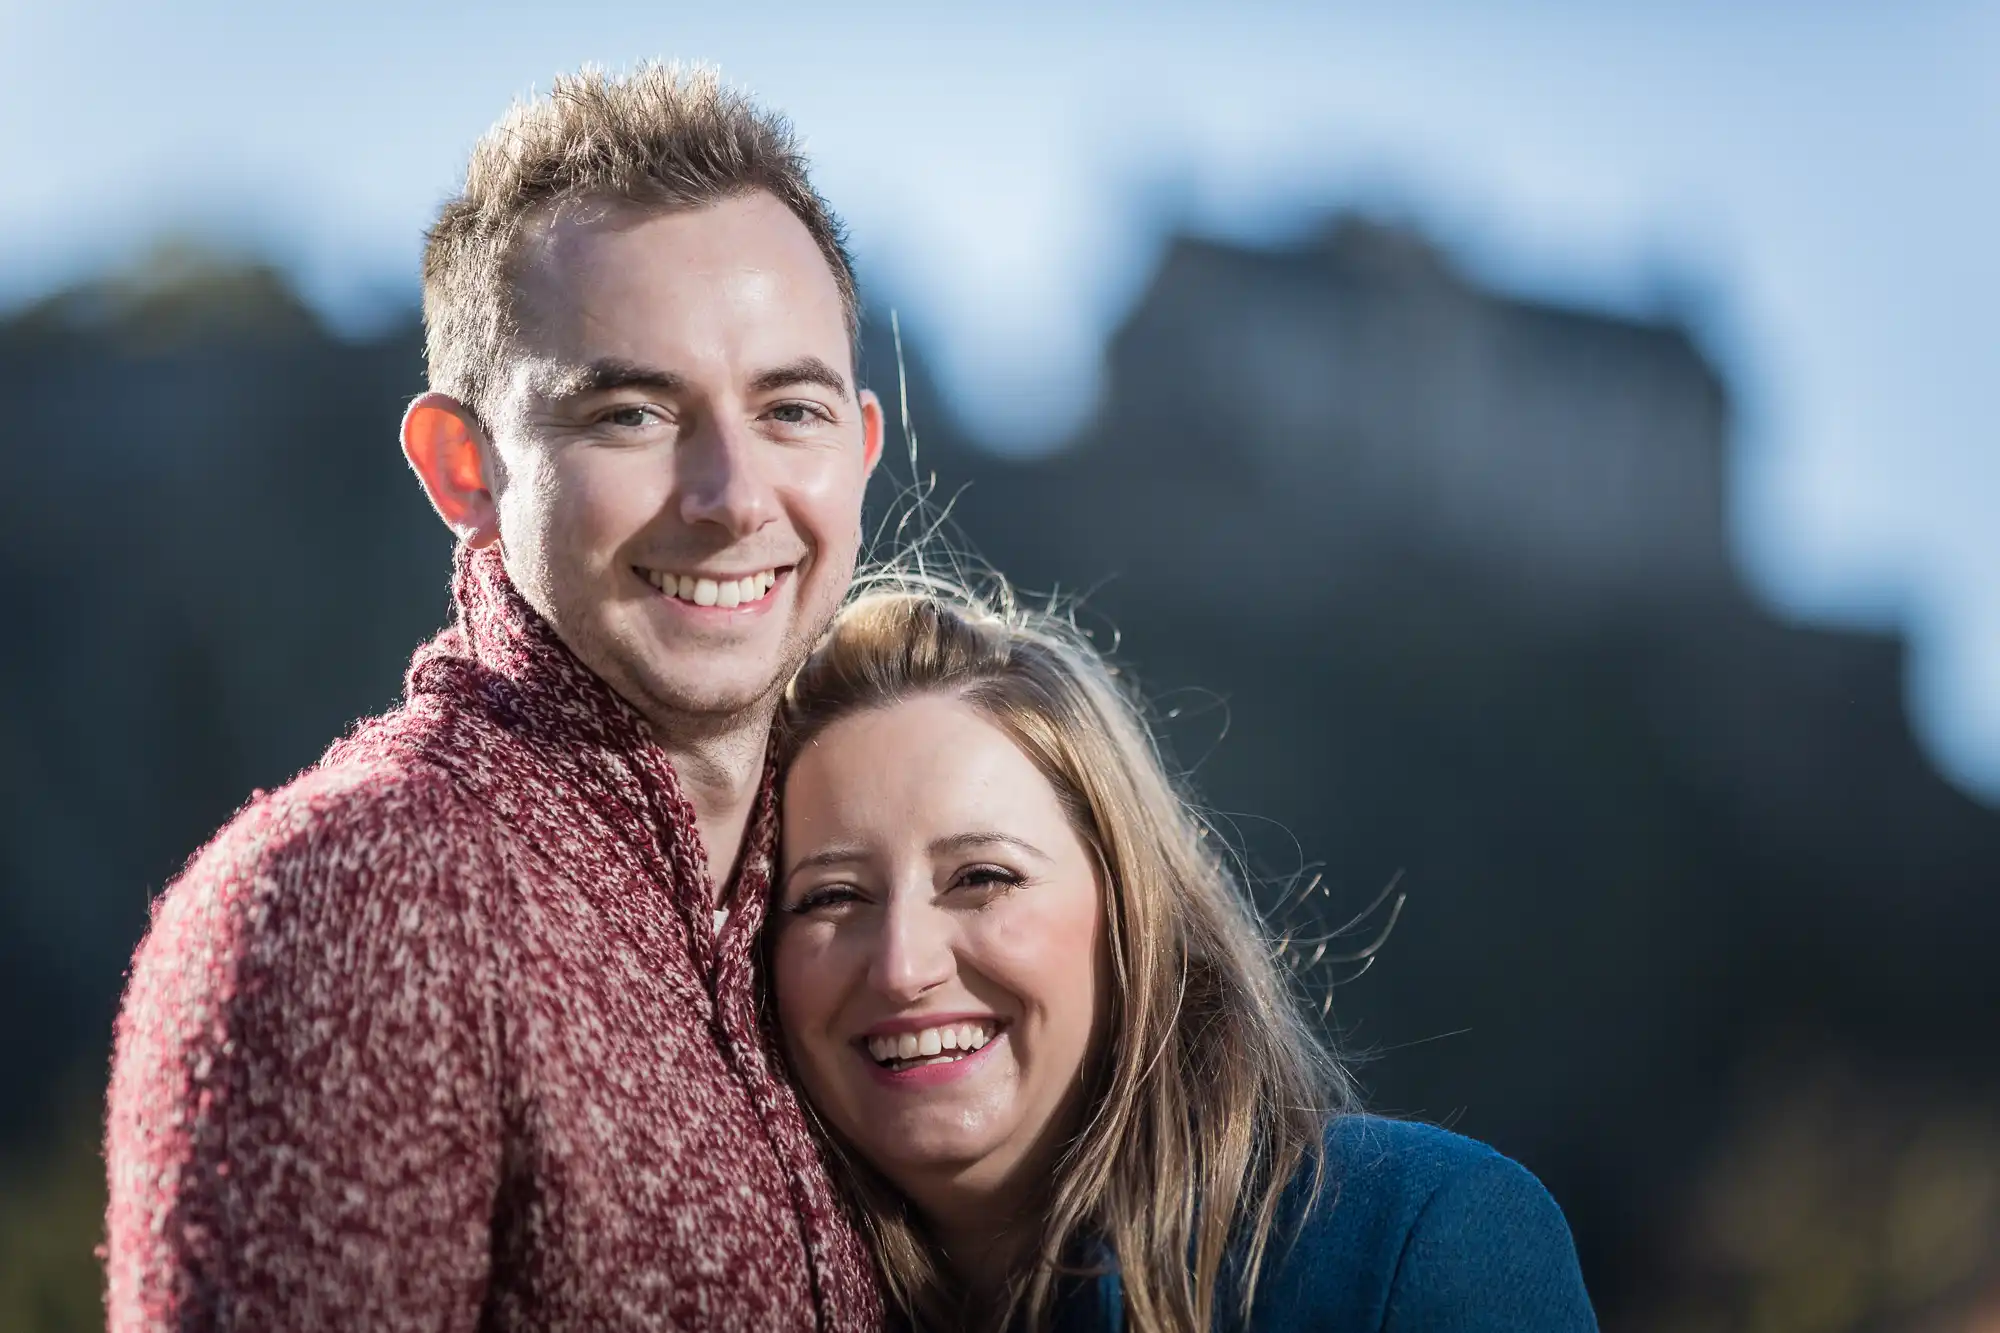 A smiling couple in warm clothing posing outdoors with a castle blurred in the background.